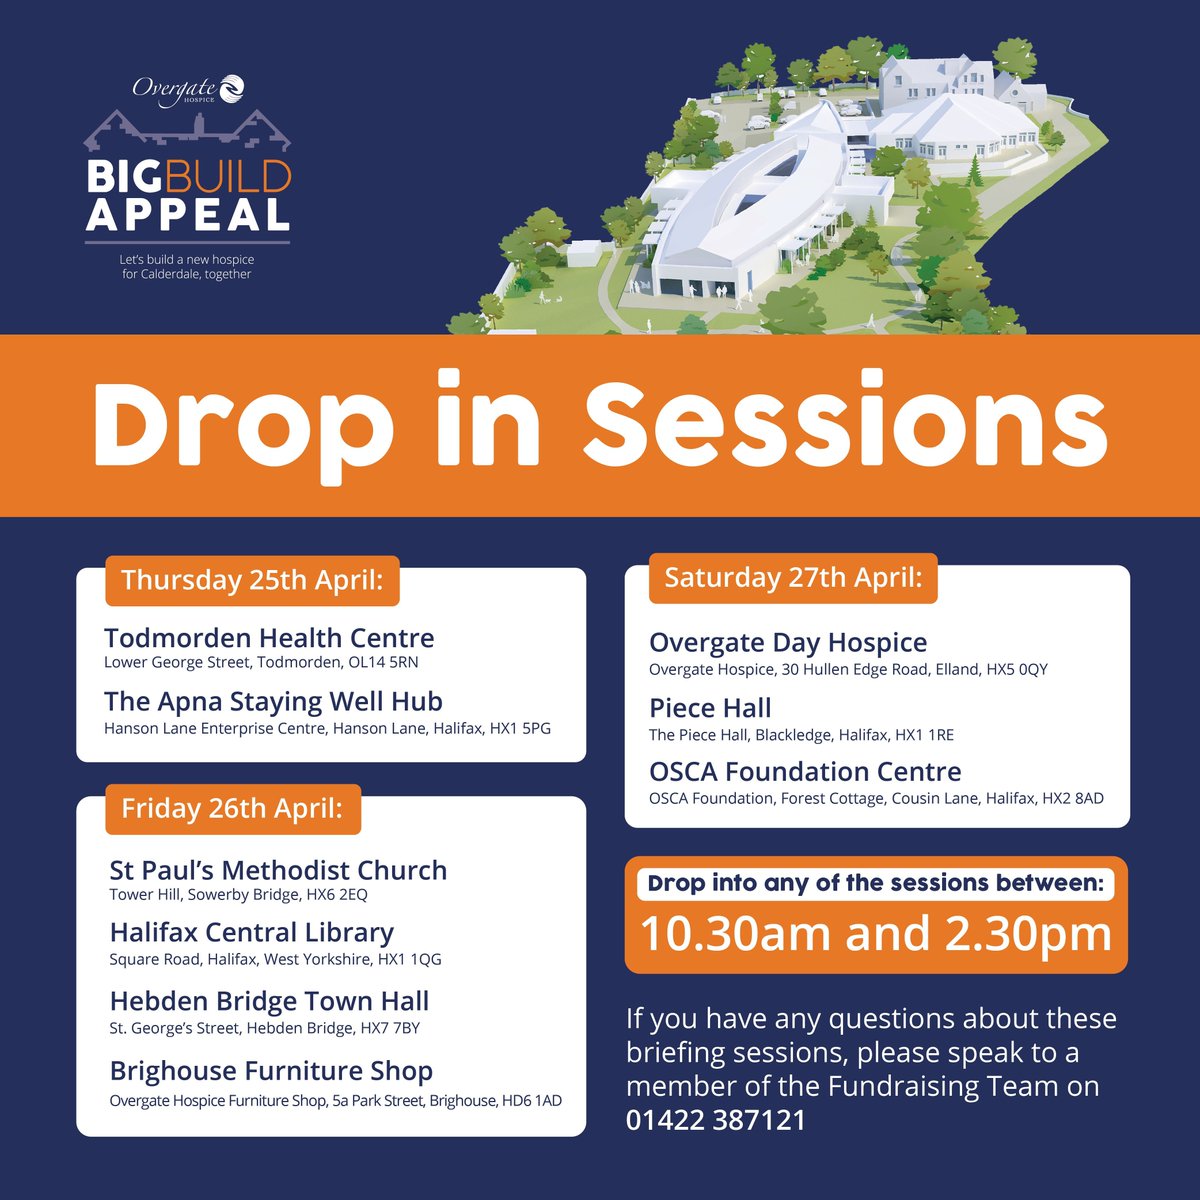 📣 Join us for our community drop-in sessions this week! 📣 Meet our team and learn all about our exciting Big Build plans to transform end-of-life care for Calderdale. 🌟 #OvergateBigBuildAppeal #CaringForCalderdale #CommunitySupport #CalderdaleCommunity